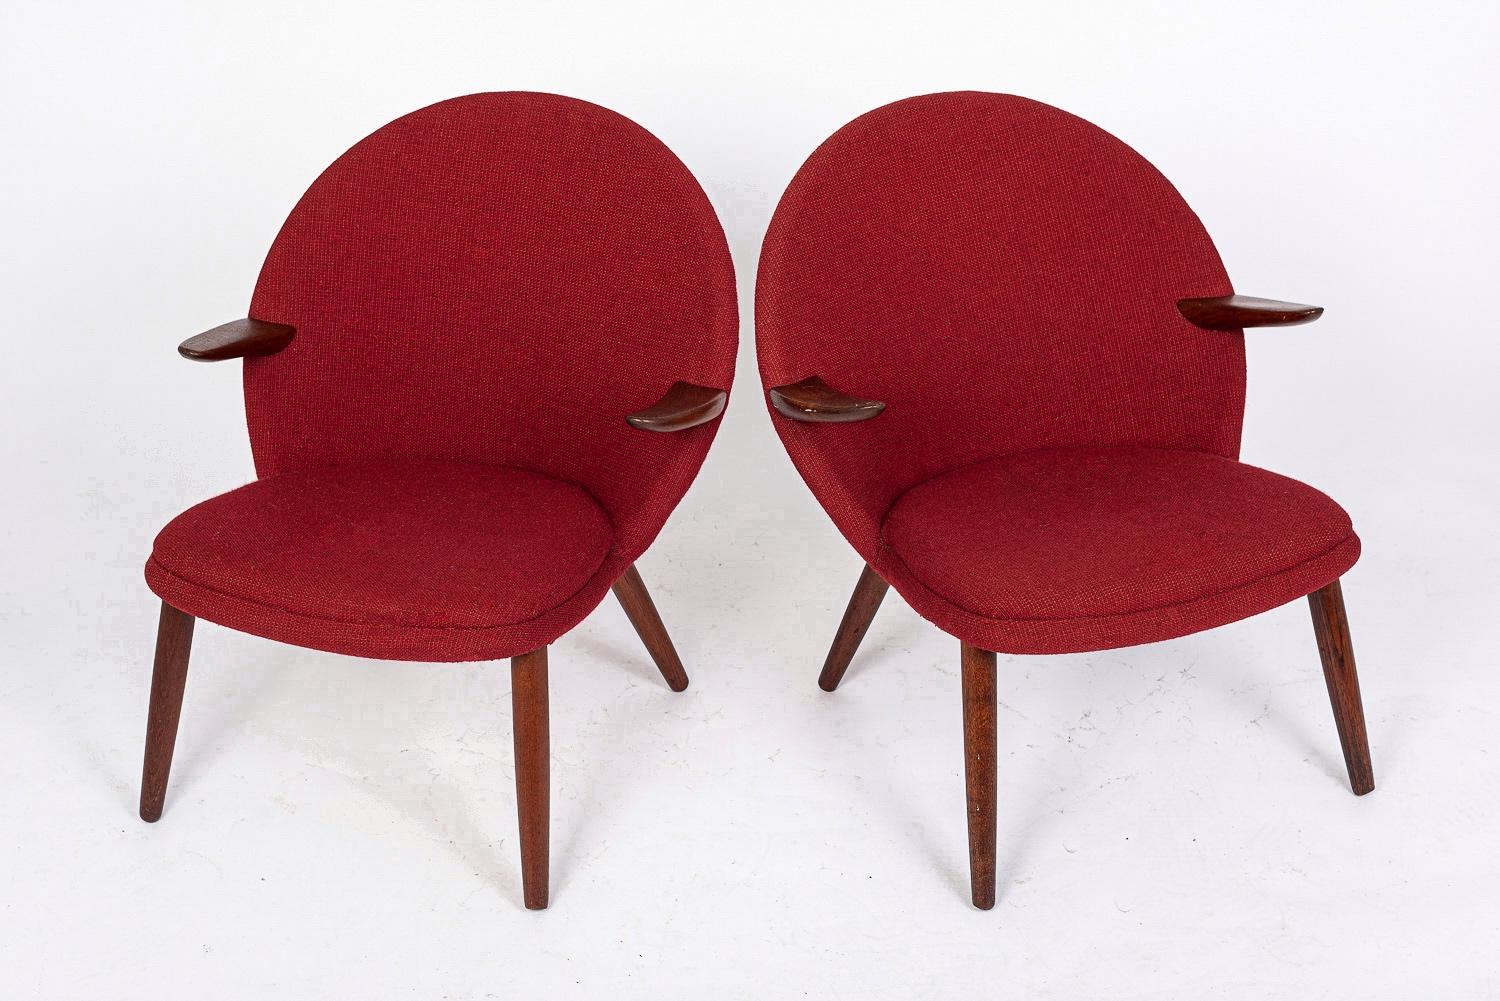 This exceptional pair of mid century Danish modern lounge chairs were designed by Kurt Olsen for Glostrup Møbelfabrik and made in Denmark circa 1960. The classic Scandinavian modern design has clean, minimalist lines and elegant curves. The lounge